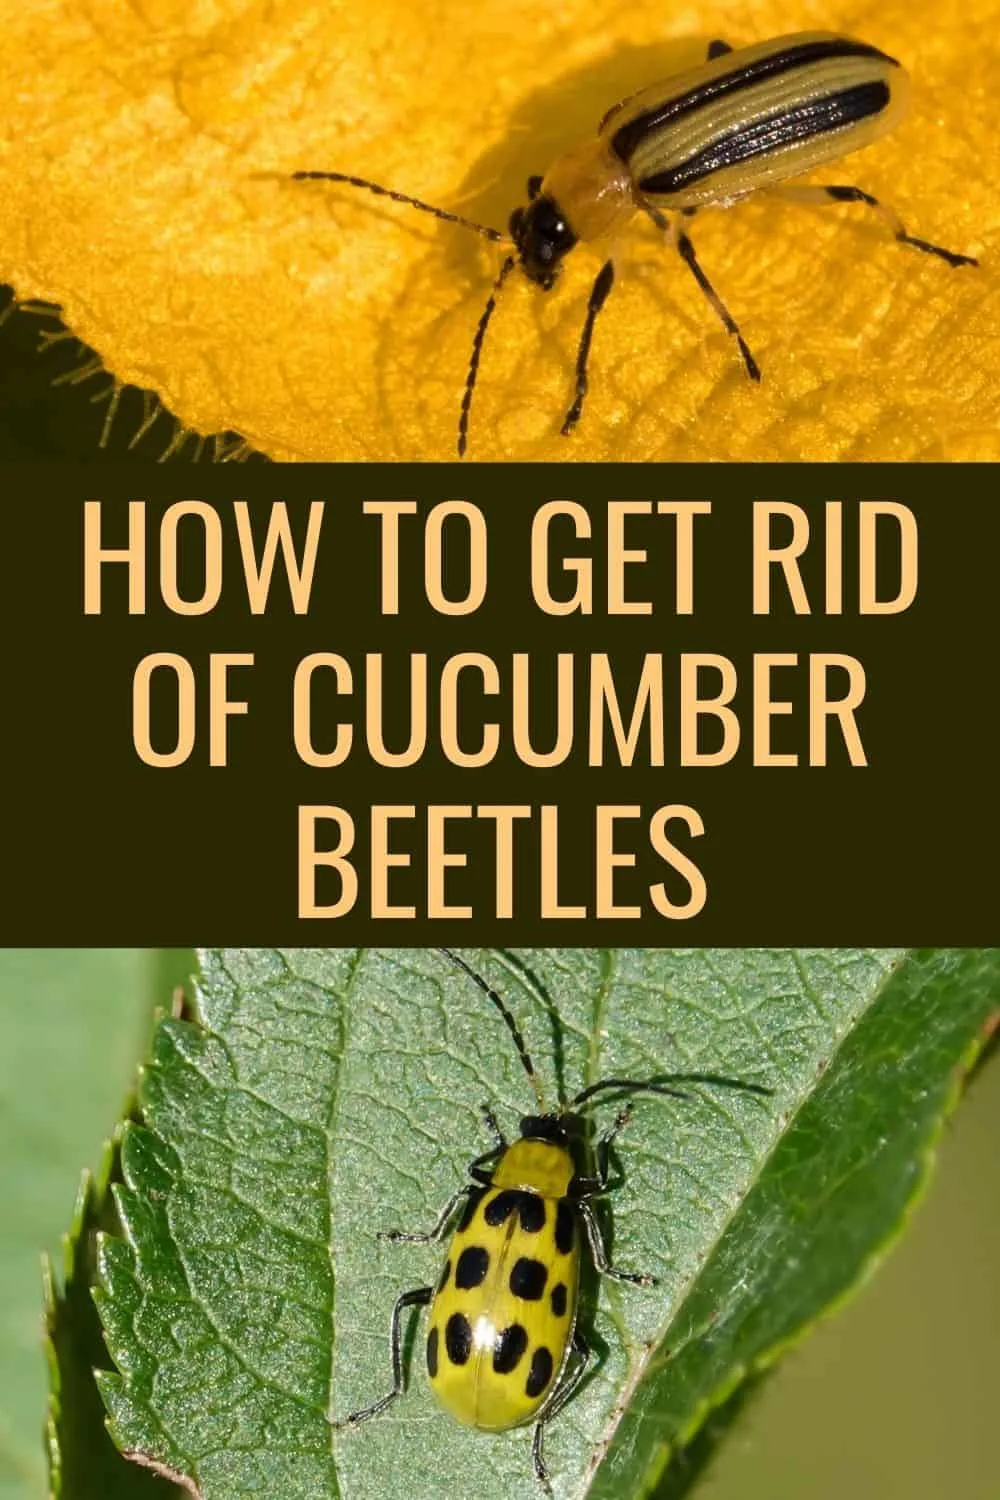 How to get rid of cucumbwr beetles